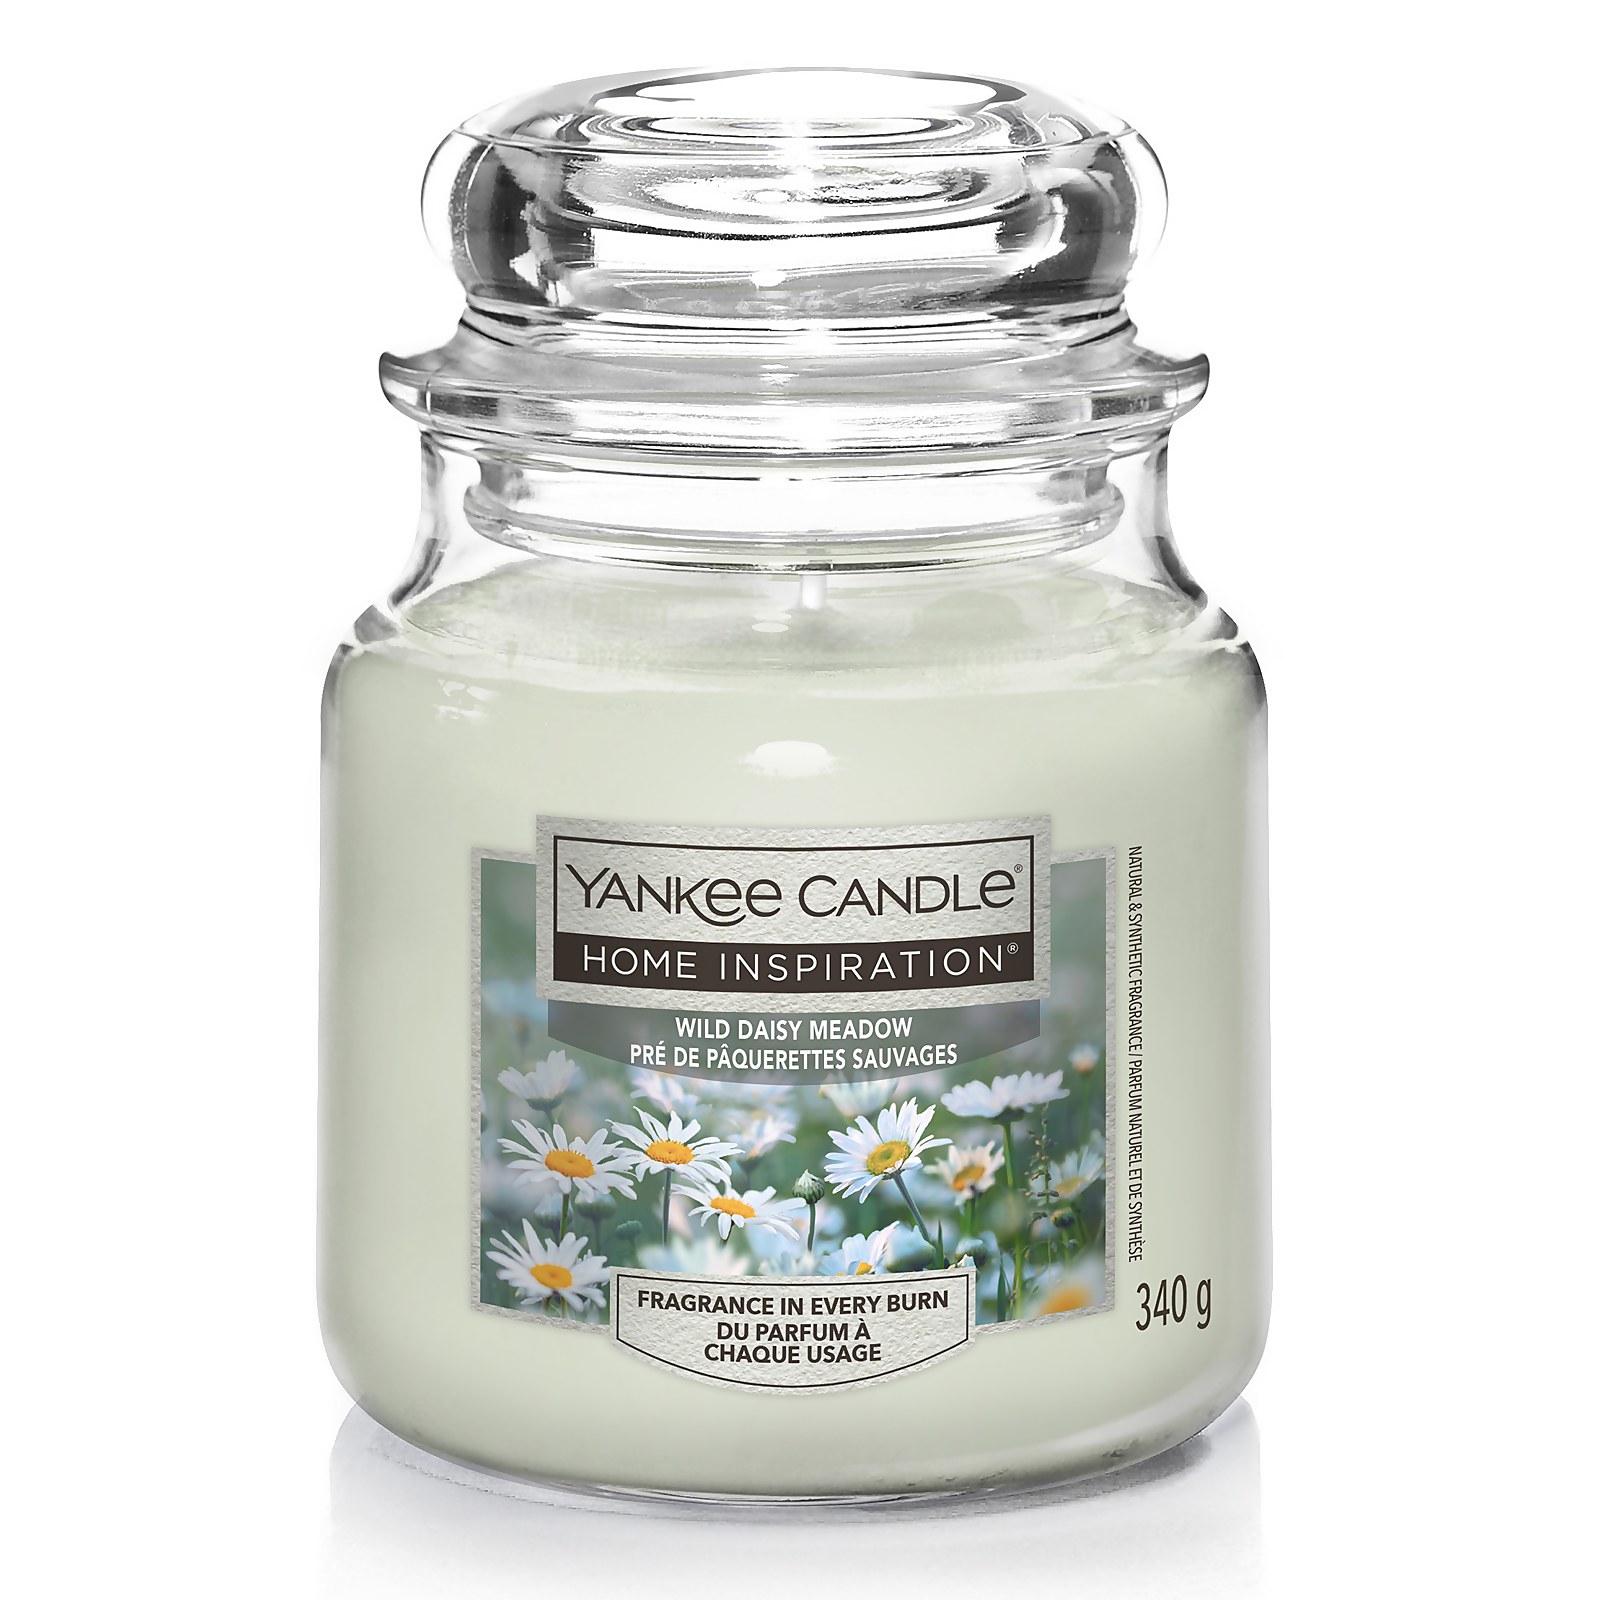 Photo of Yankee Candle Home Inspiration Scented Candle - Medium Jar - Wild Daisy Meadow